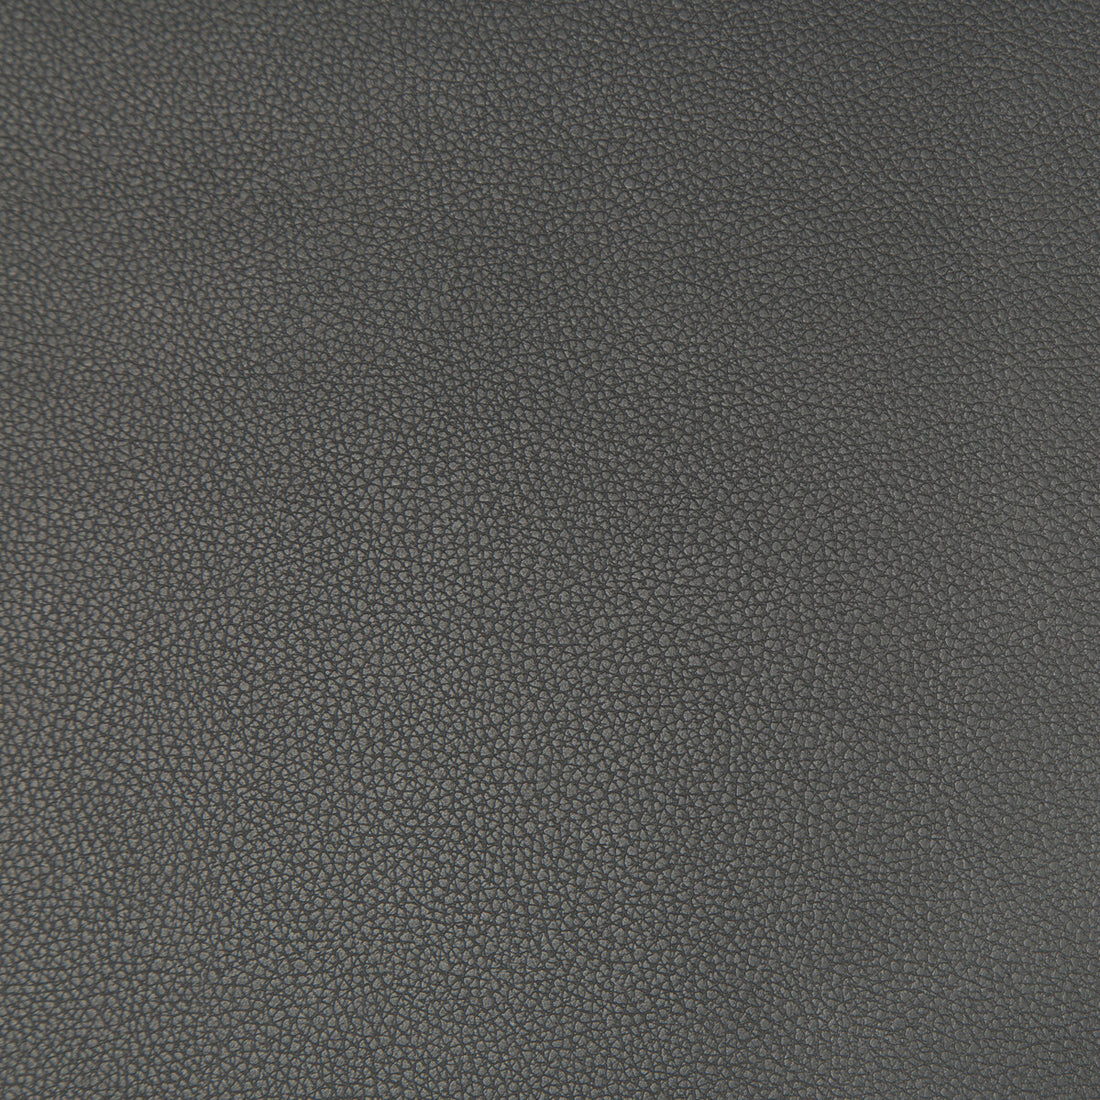 Syrus fabric in gunmetal color - pattern SYRUS.2121.0 - by Kravet Contract